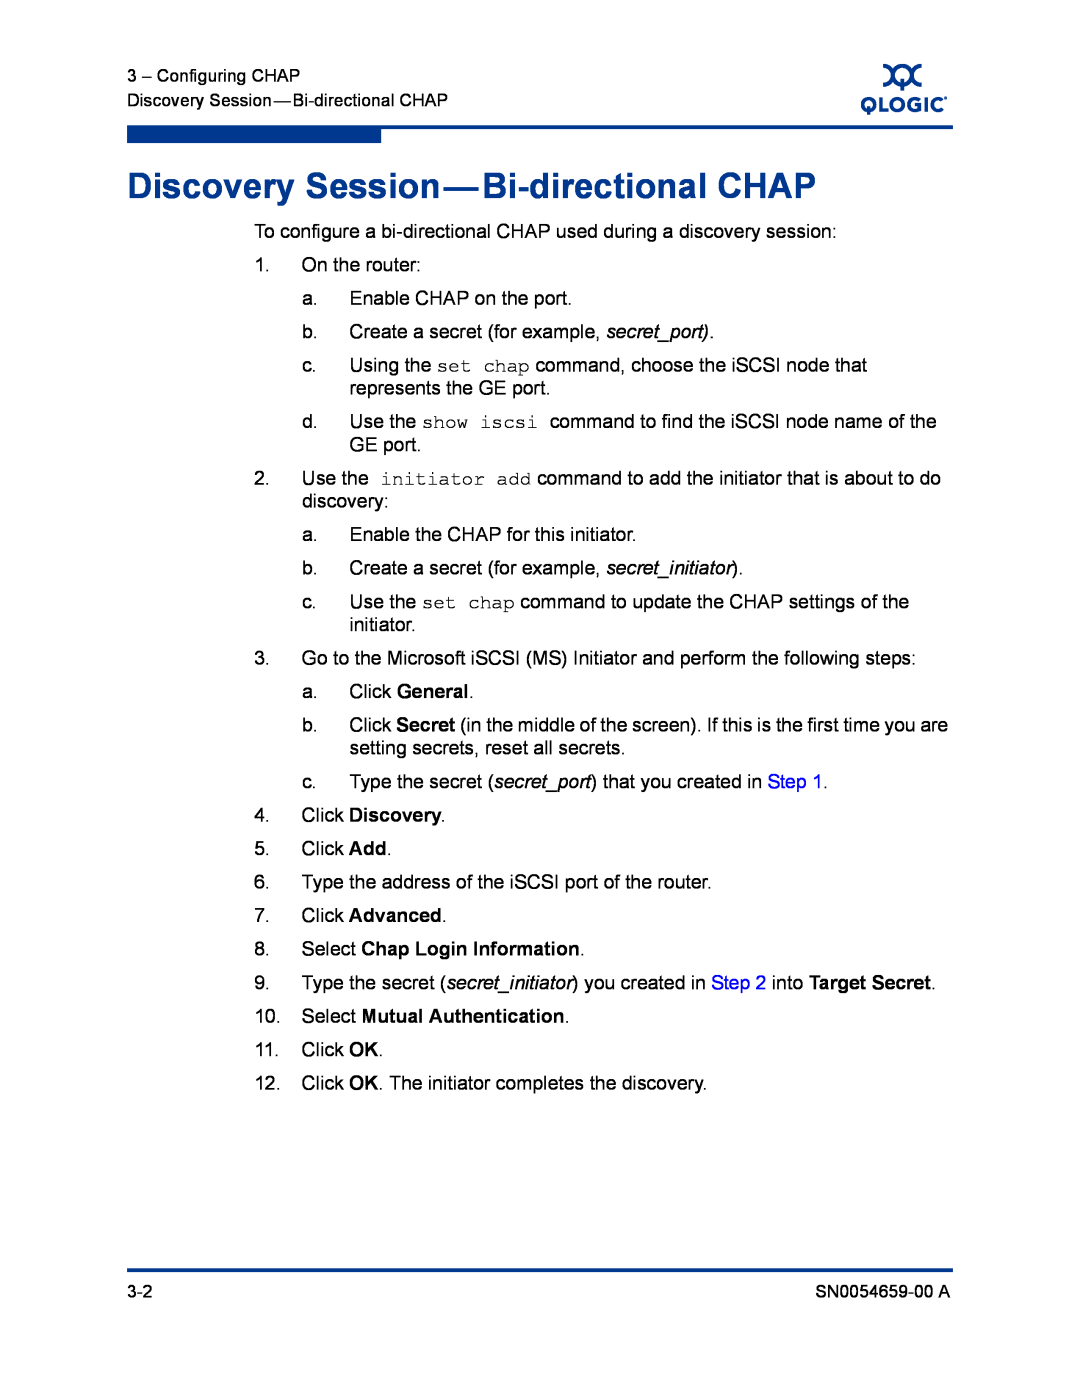 Q-Logic ISR6142 Discovery Session-Bi-directional CHAP, Click Discovery, Click Advanced 8. Select Chap Login Information 